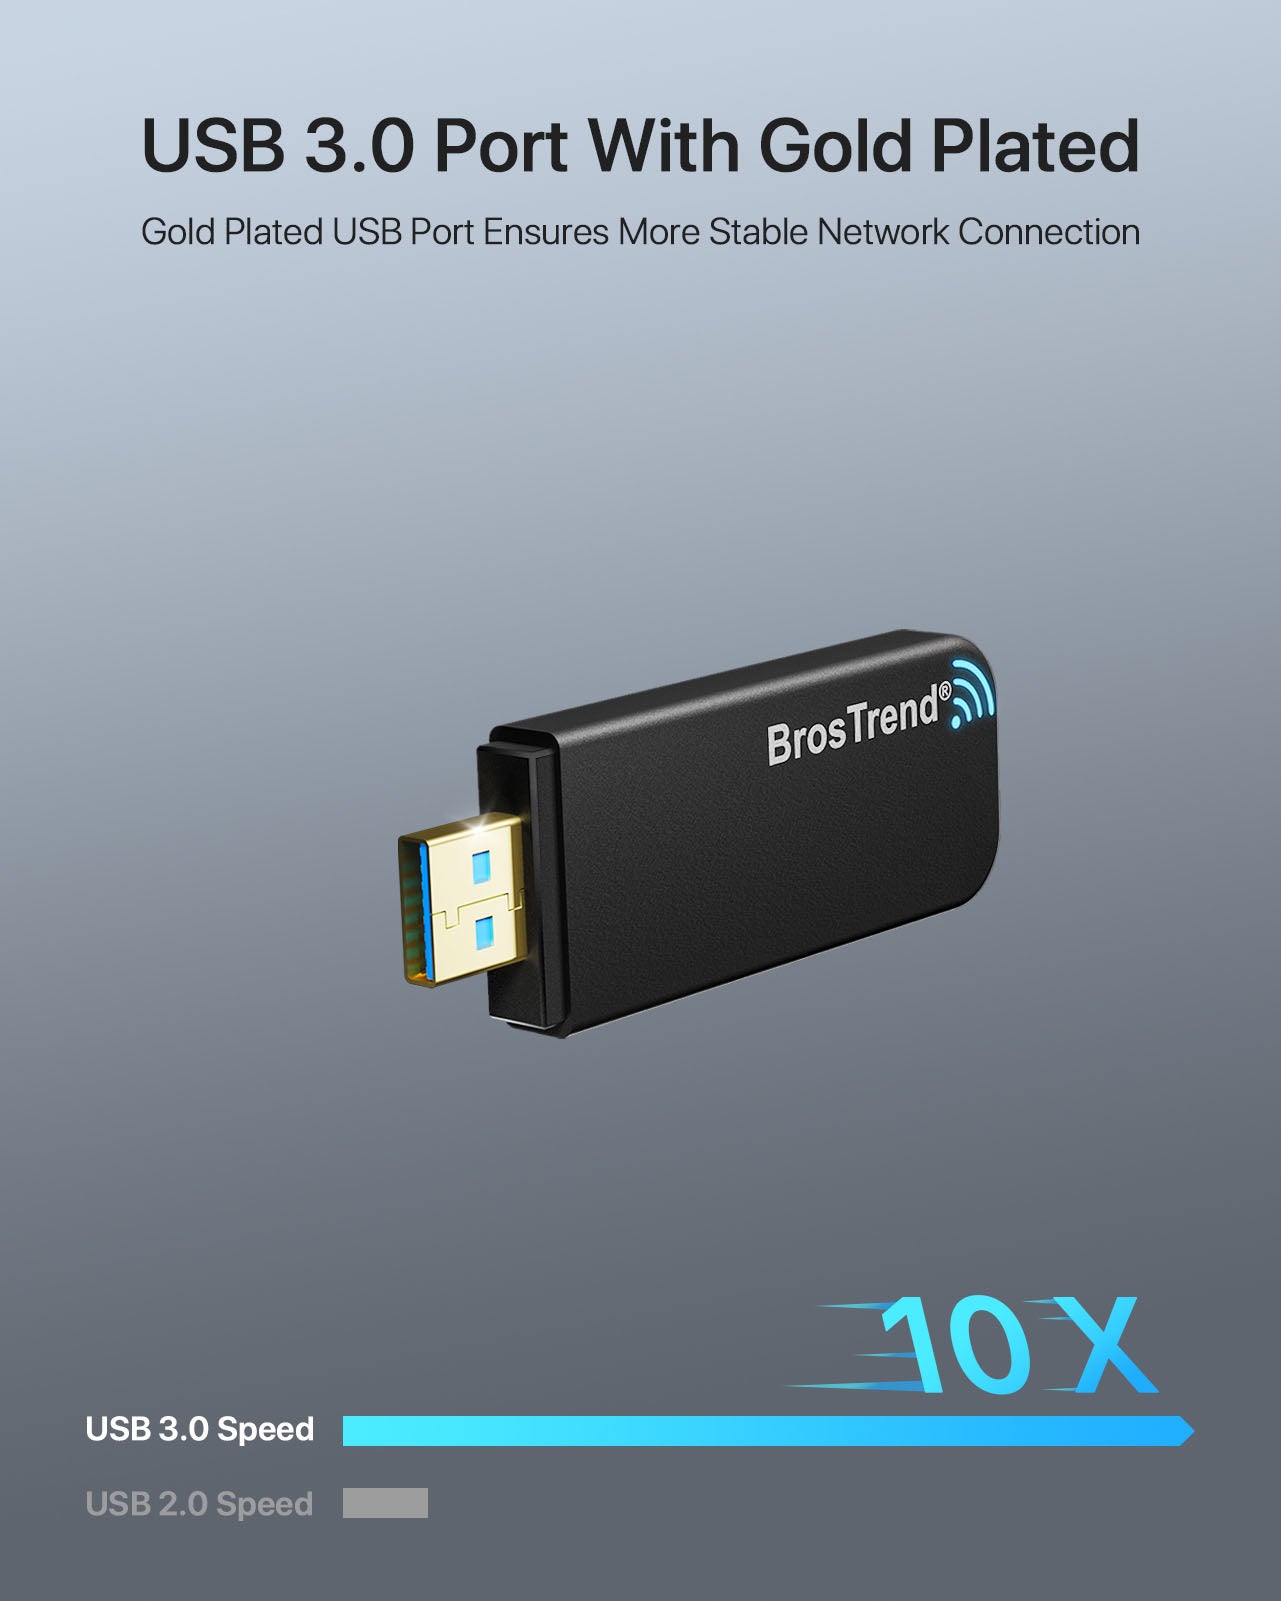 Linux USB WiFi Adapter Ensures Stable Data Transfer with Gold Plated USB 3.0 Port Which Is 10 Times Faster Than USB 2.0 Port